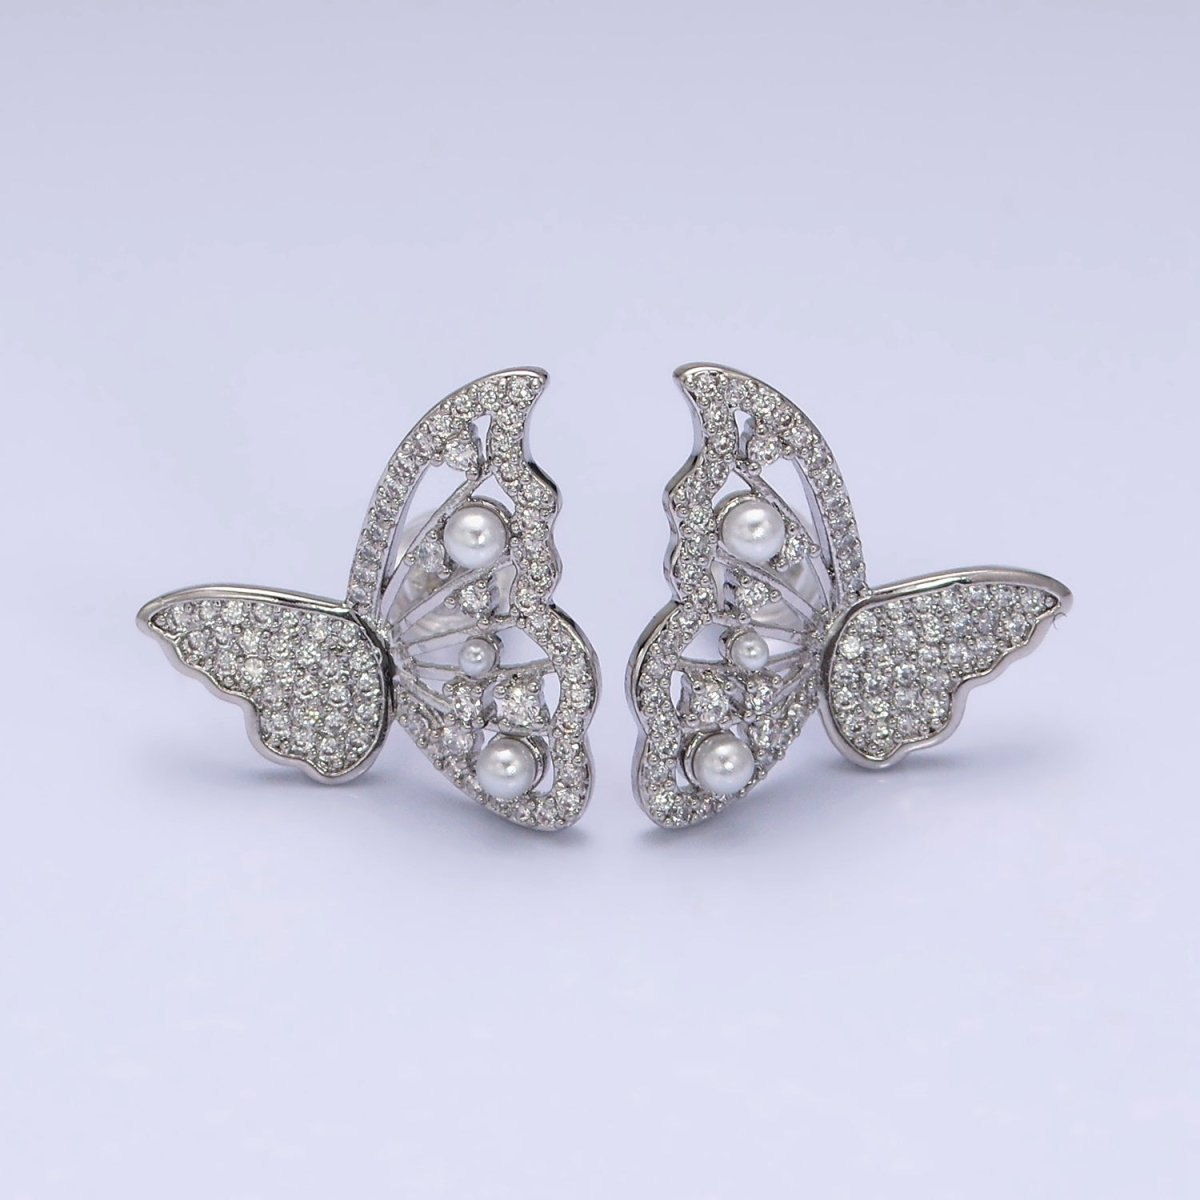 16K Gold Filled Butterfly Wings Pearl Micro Paved CZ Stud Earrings Set in Gold & Silver | AD1322 AD1342 - DLUXCA